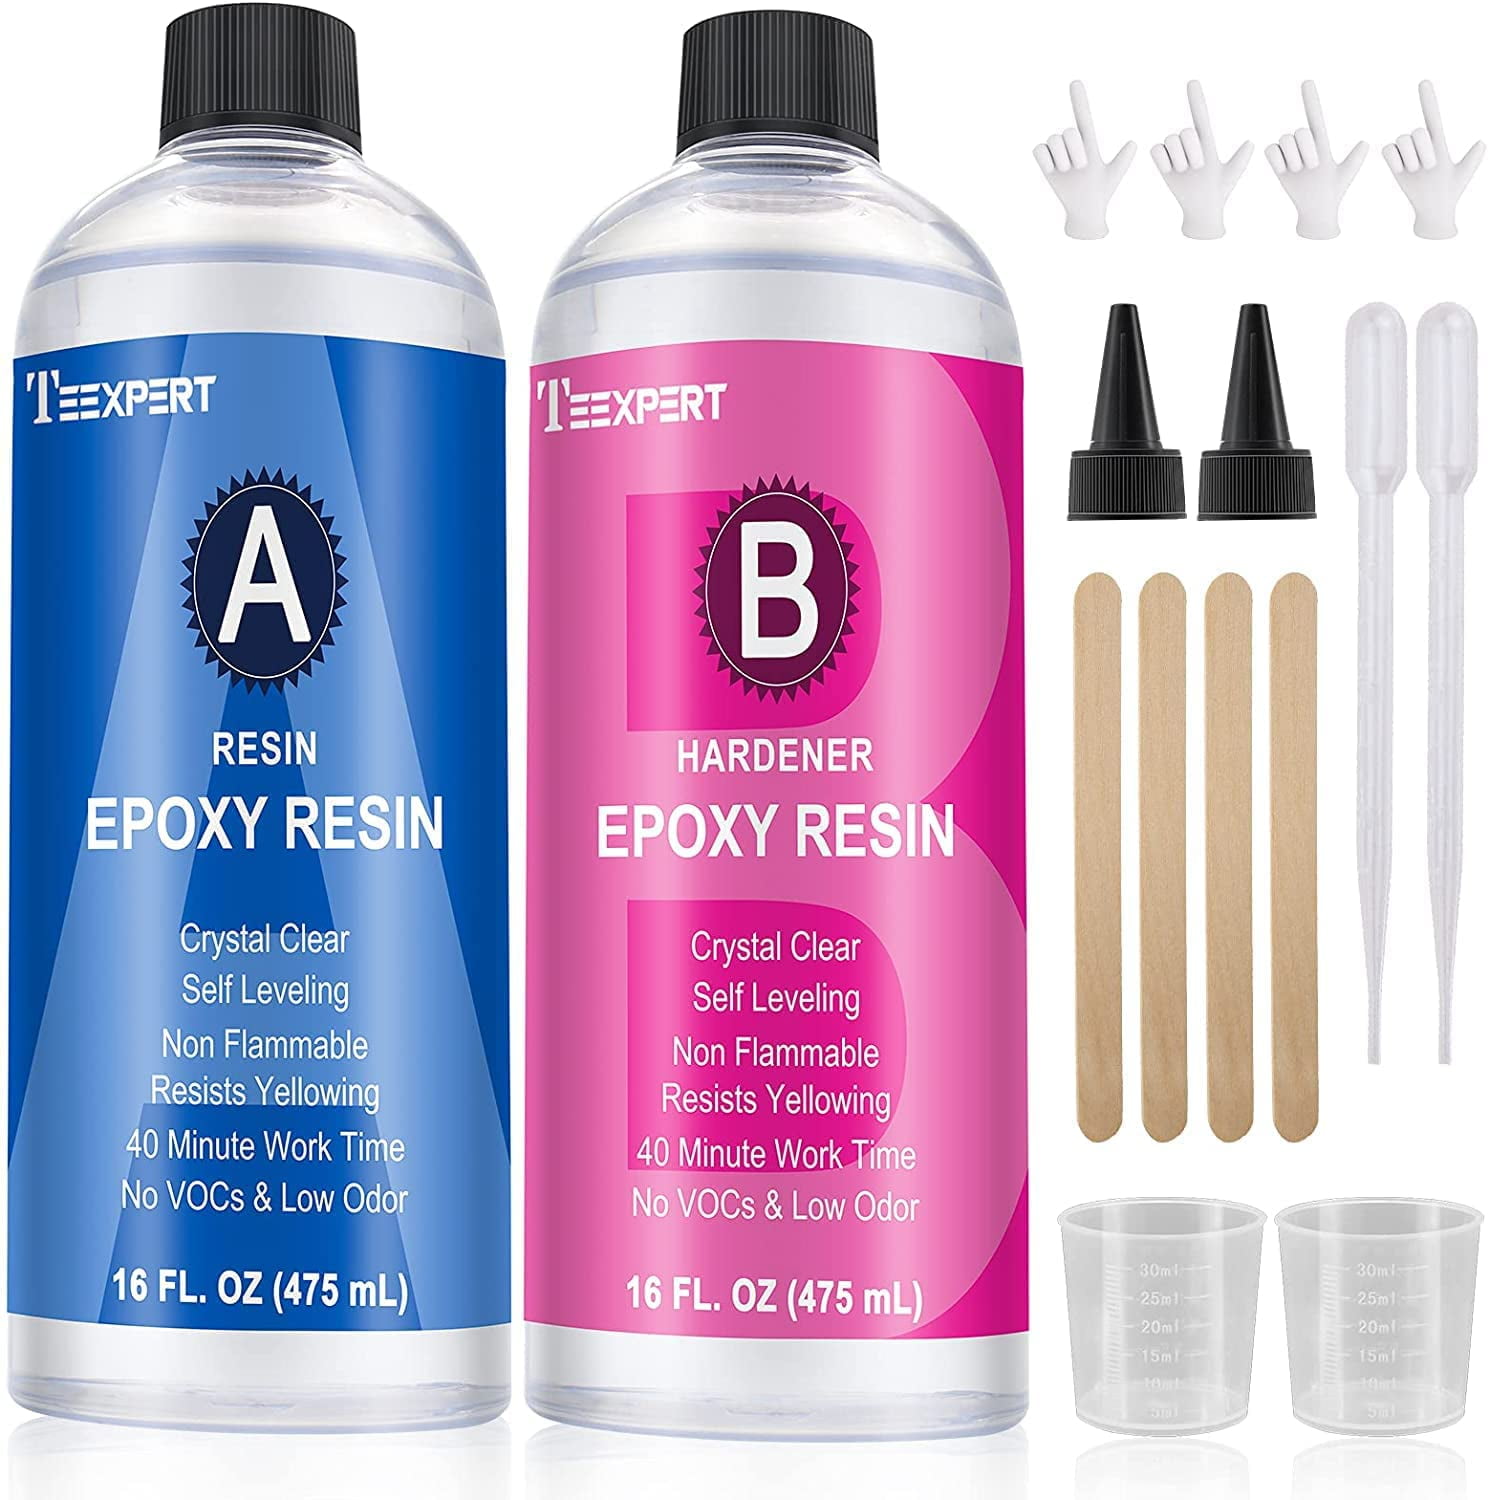 Super-UV Inhibitor Additive - Superclear Epoxy Resin Systems